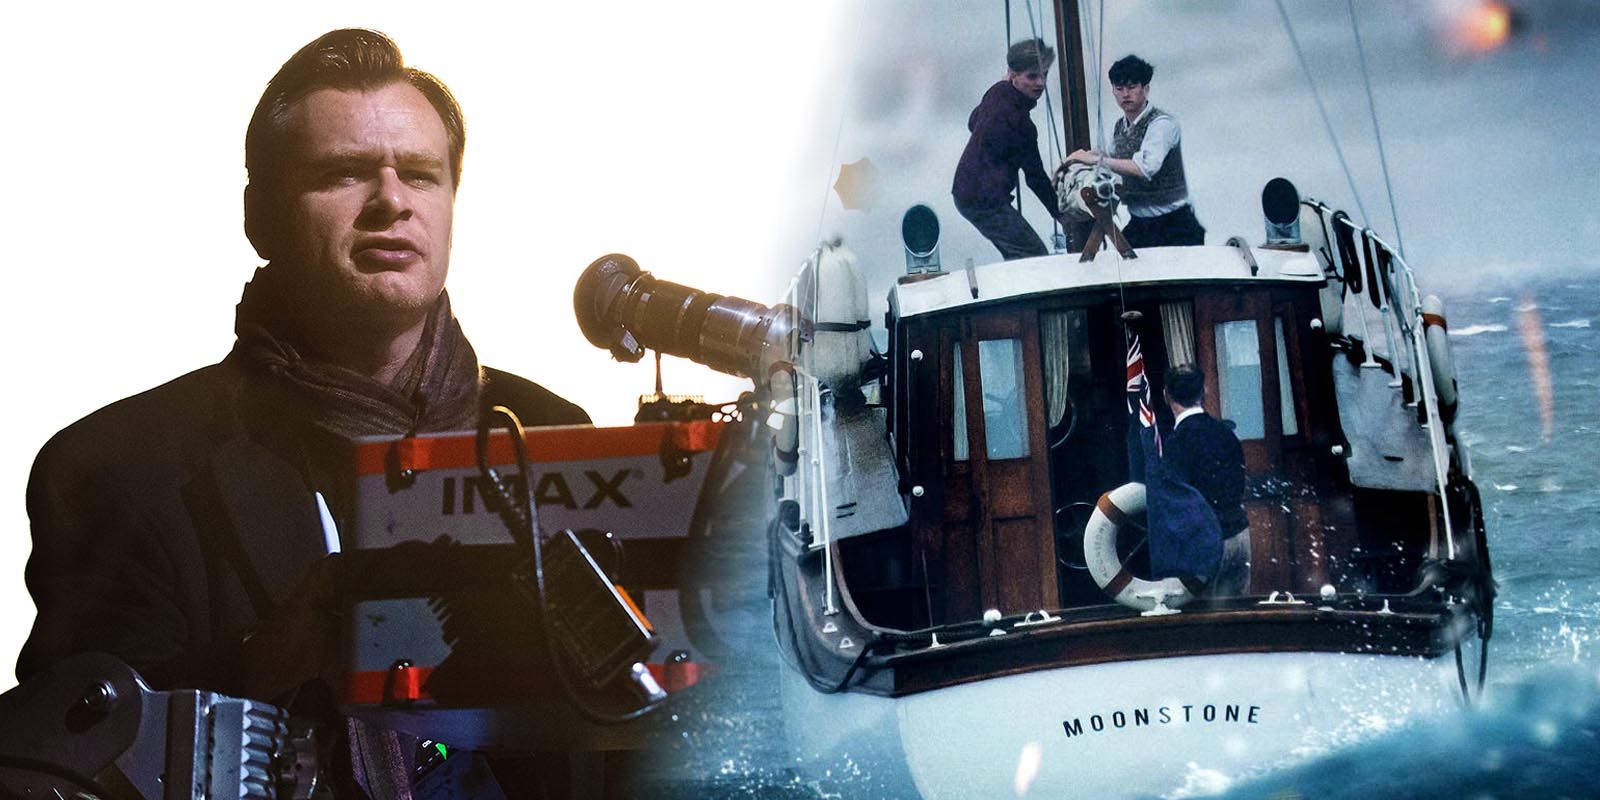 Dunkirk Christopher Nolan with IMAX camera and IMAX poster side by side